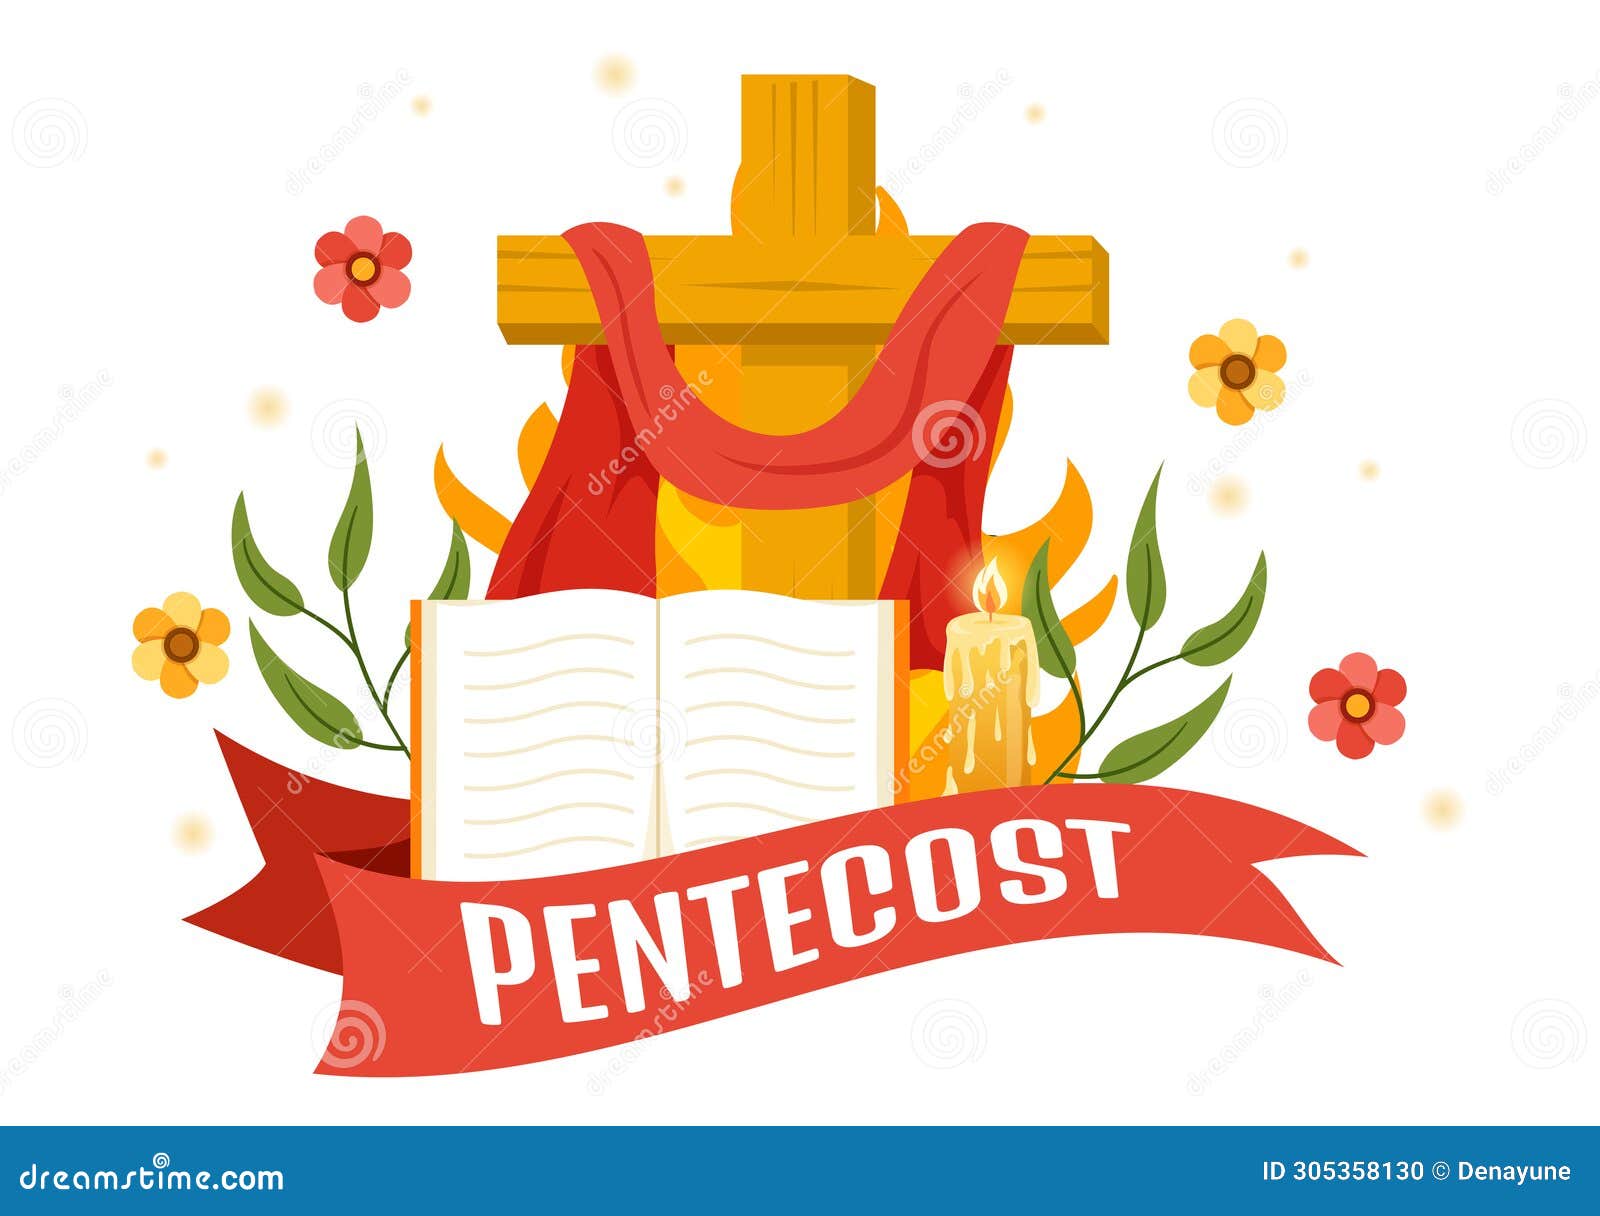 pentecost sunday   with flame and holy spirit dove in catholics or christians religious culture holiday